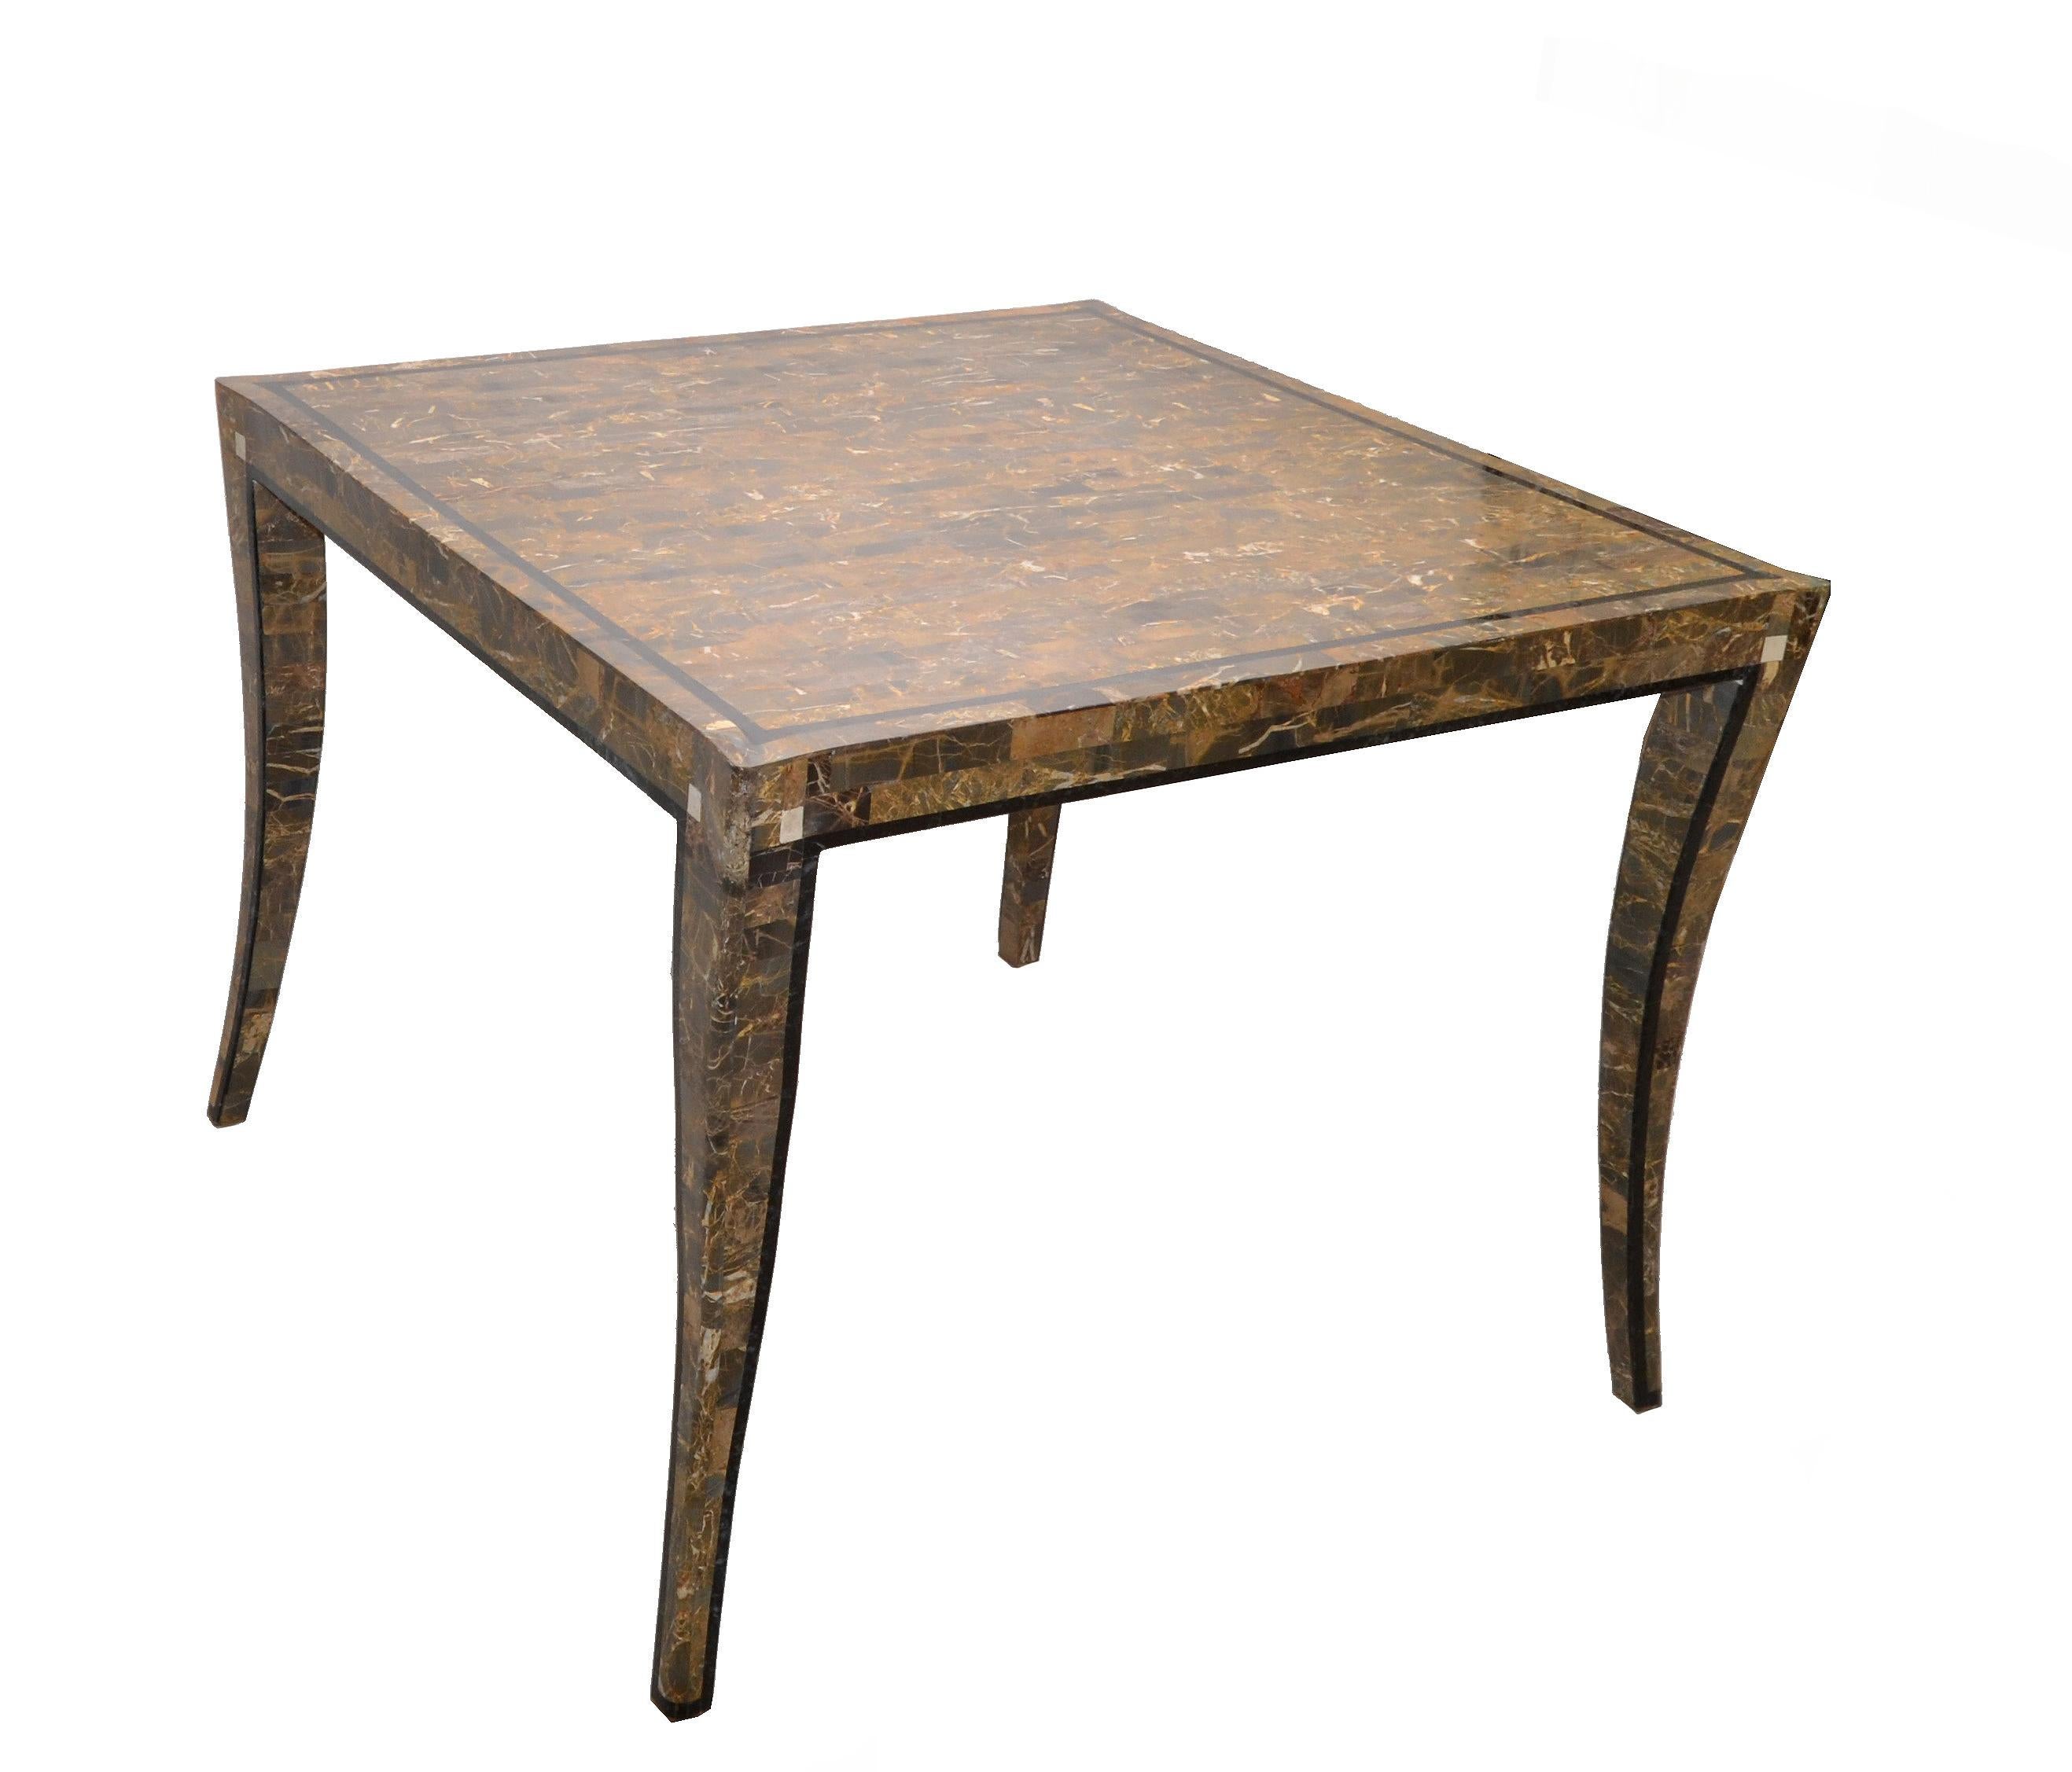 Neoclassical Maitland Smith Style Tessellated Stone over Wood Square Game Table Curved Legs